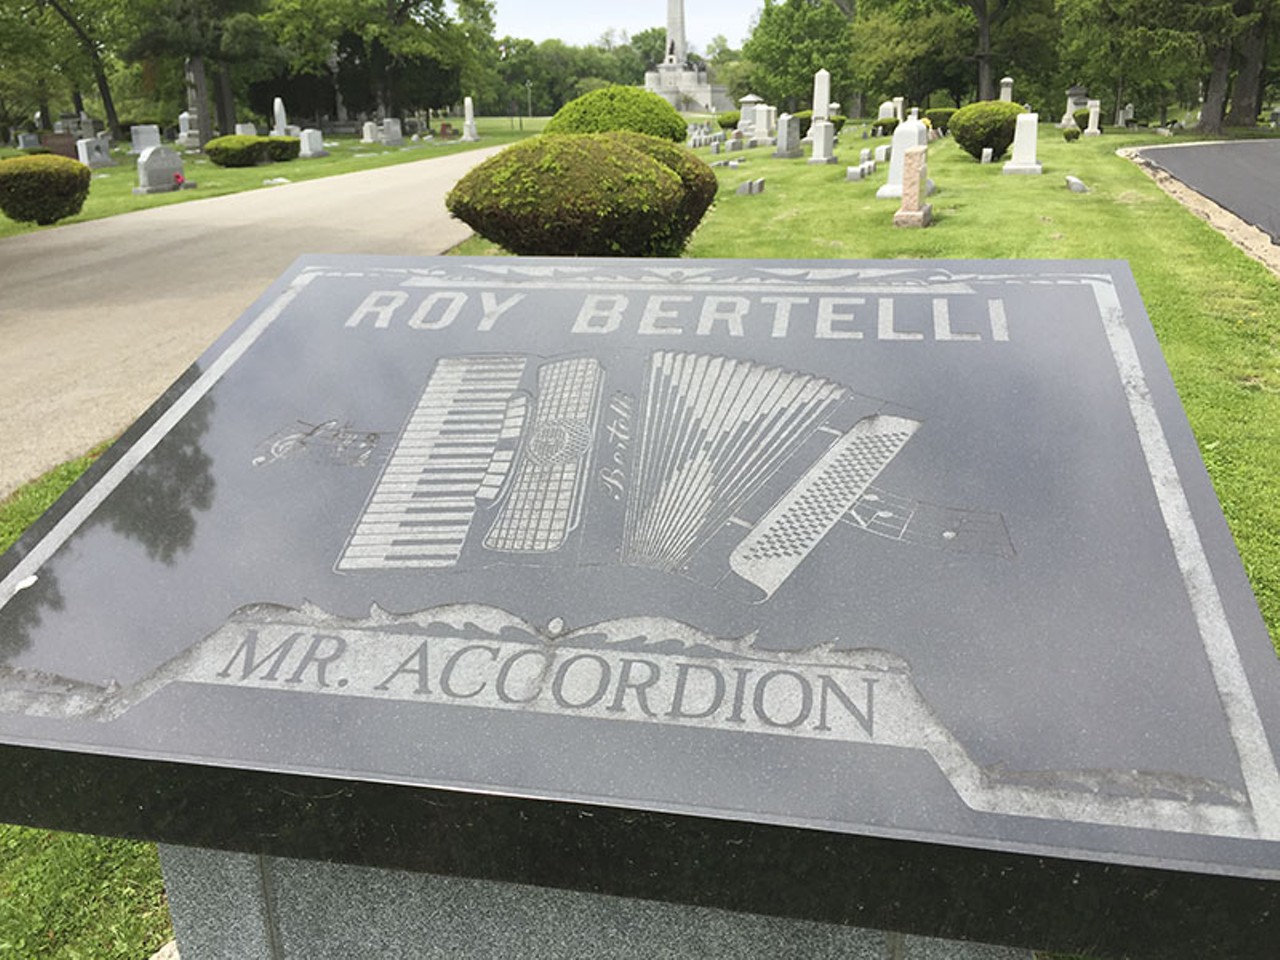 Lincoln's tomb is less than five miles north of Cozy in the Oak Ridge Cemetery (1441 Monument Avenue, 217-782-2717; www.lincolntomb.org). Pause inside the gates and pay your respects to Roy "Mr. Accordion" Bertelli. Photo by Jenna Murphy.